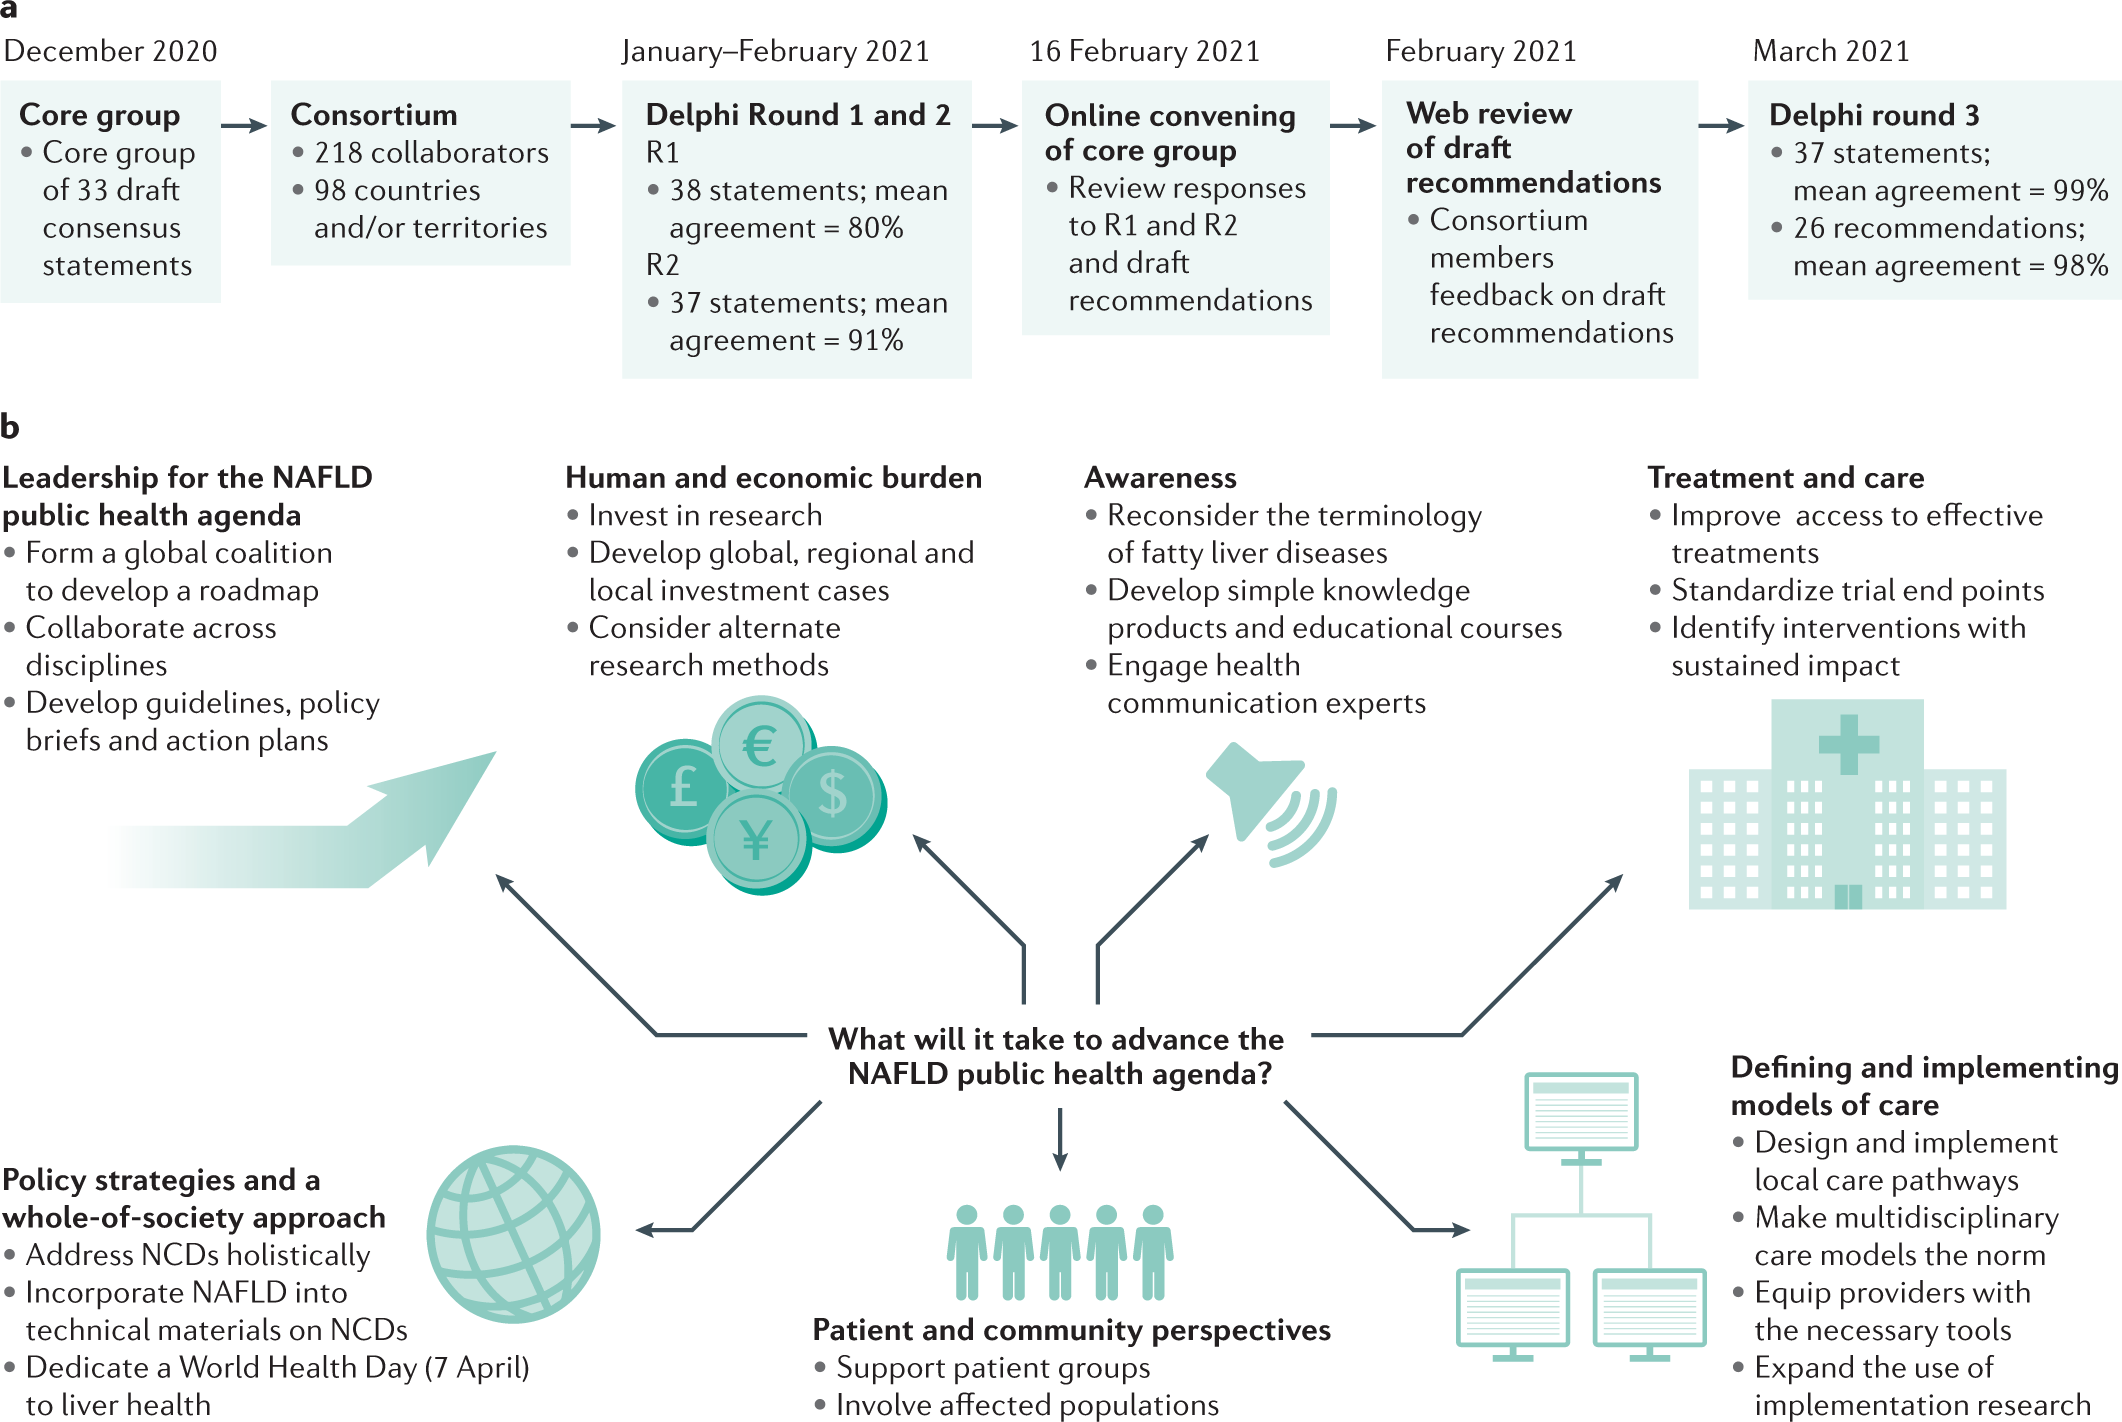 Advancing the global public health agenda for NAFLD: a consensus statement  | Nature Reviews Gastroenterology & Hepatology